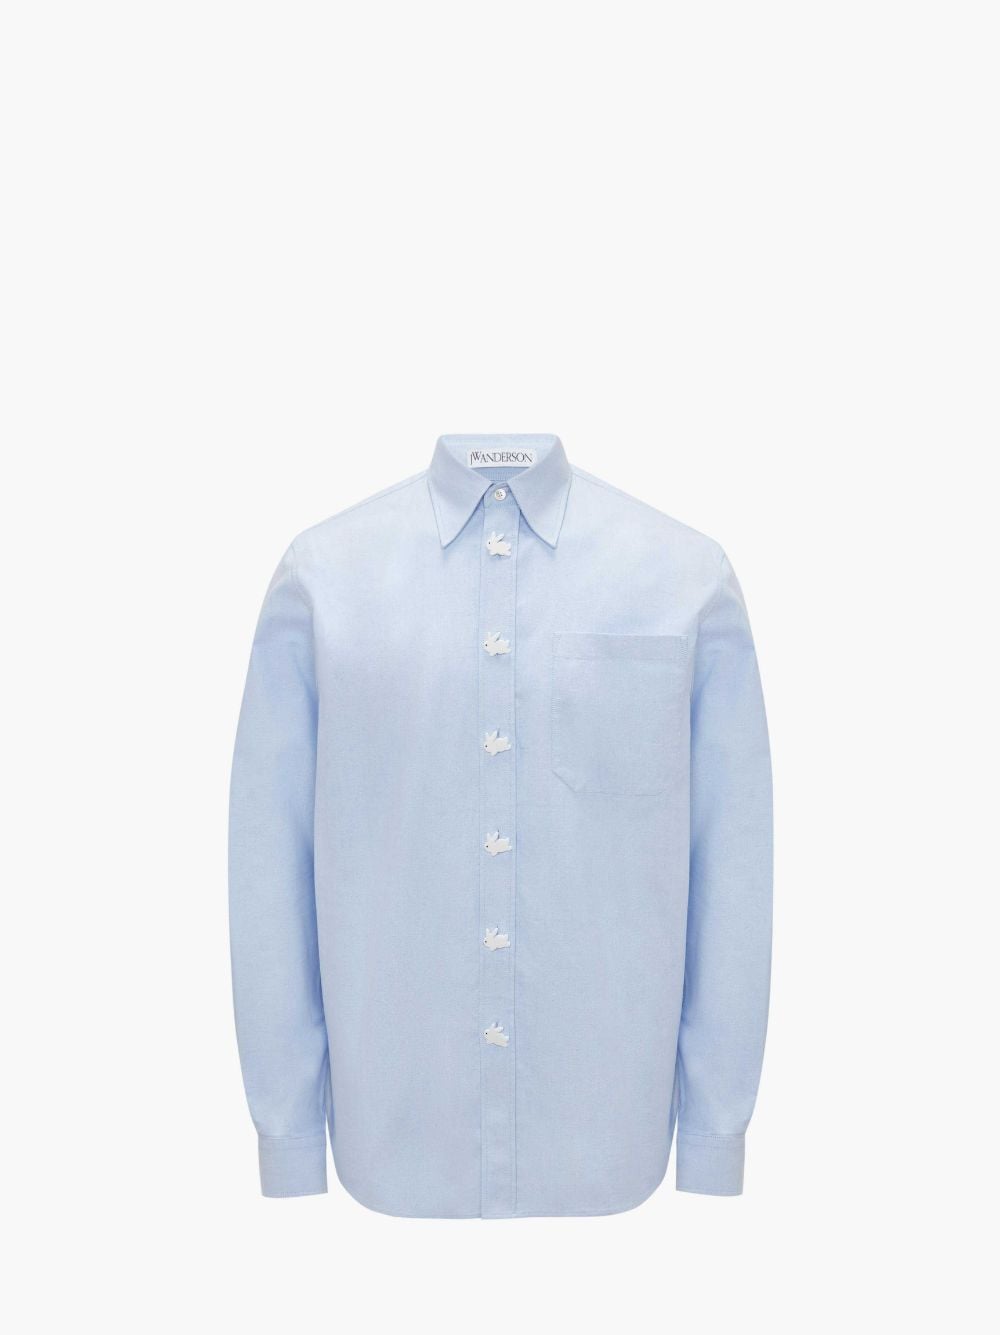 BUNNY BUTTON SHIRT in blue | JW Anderson